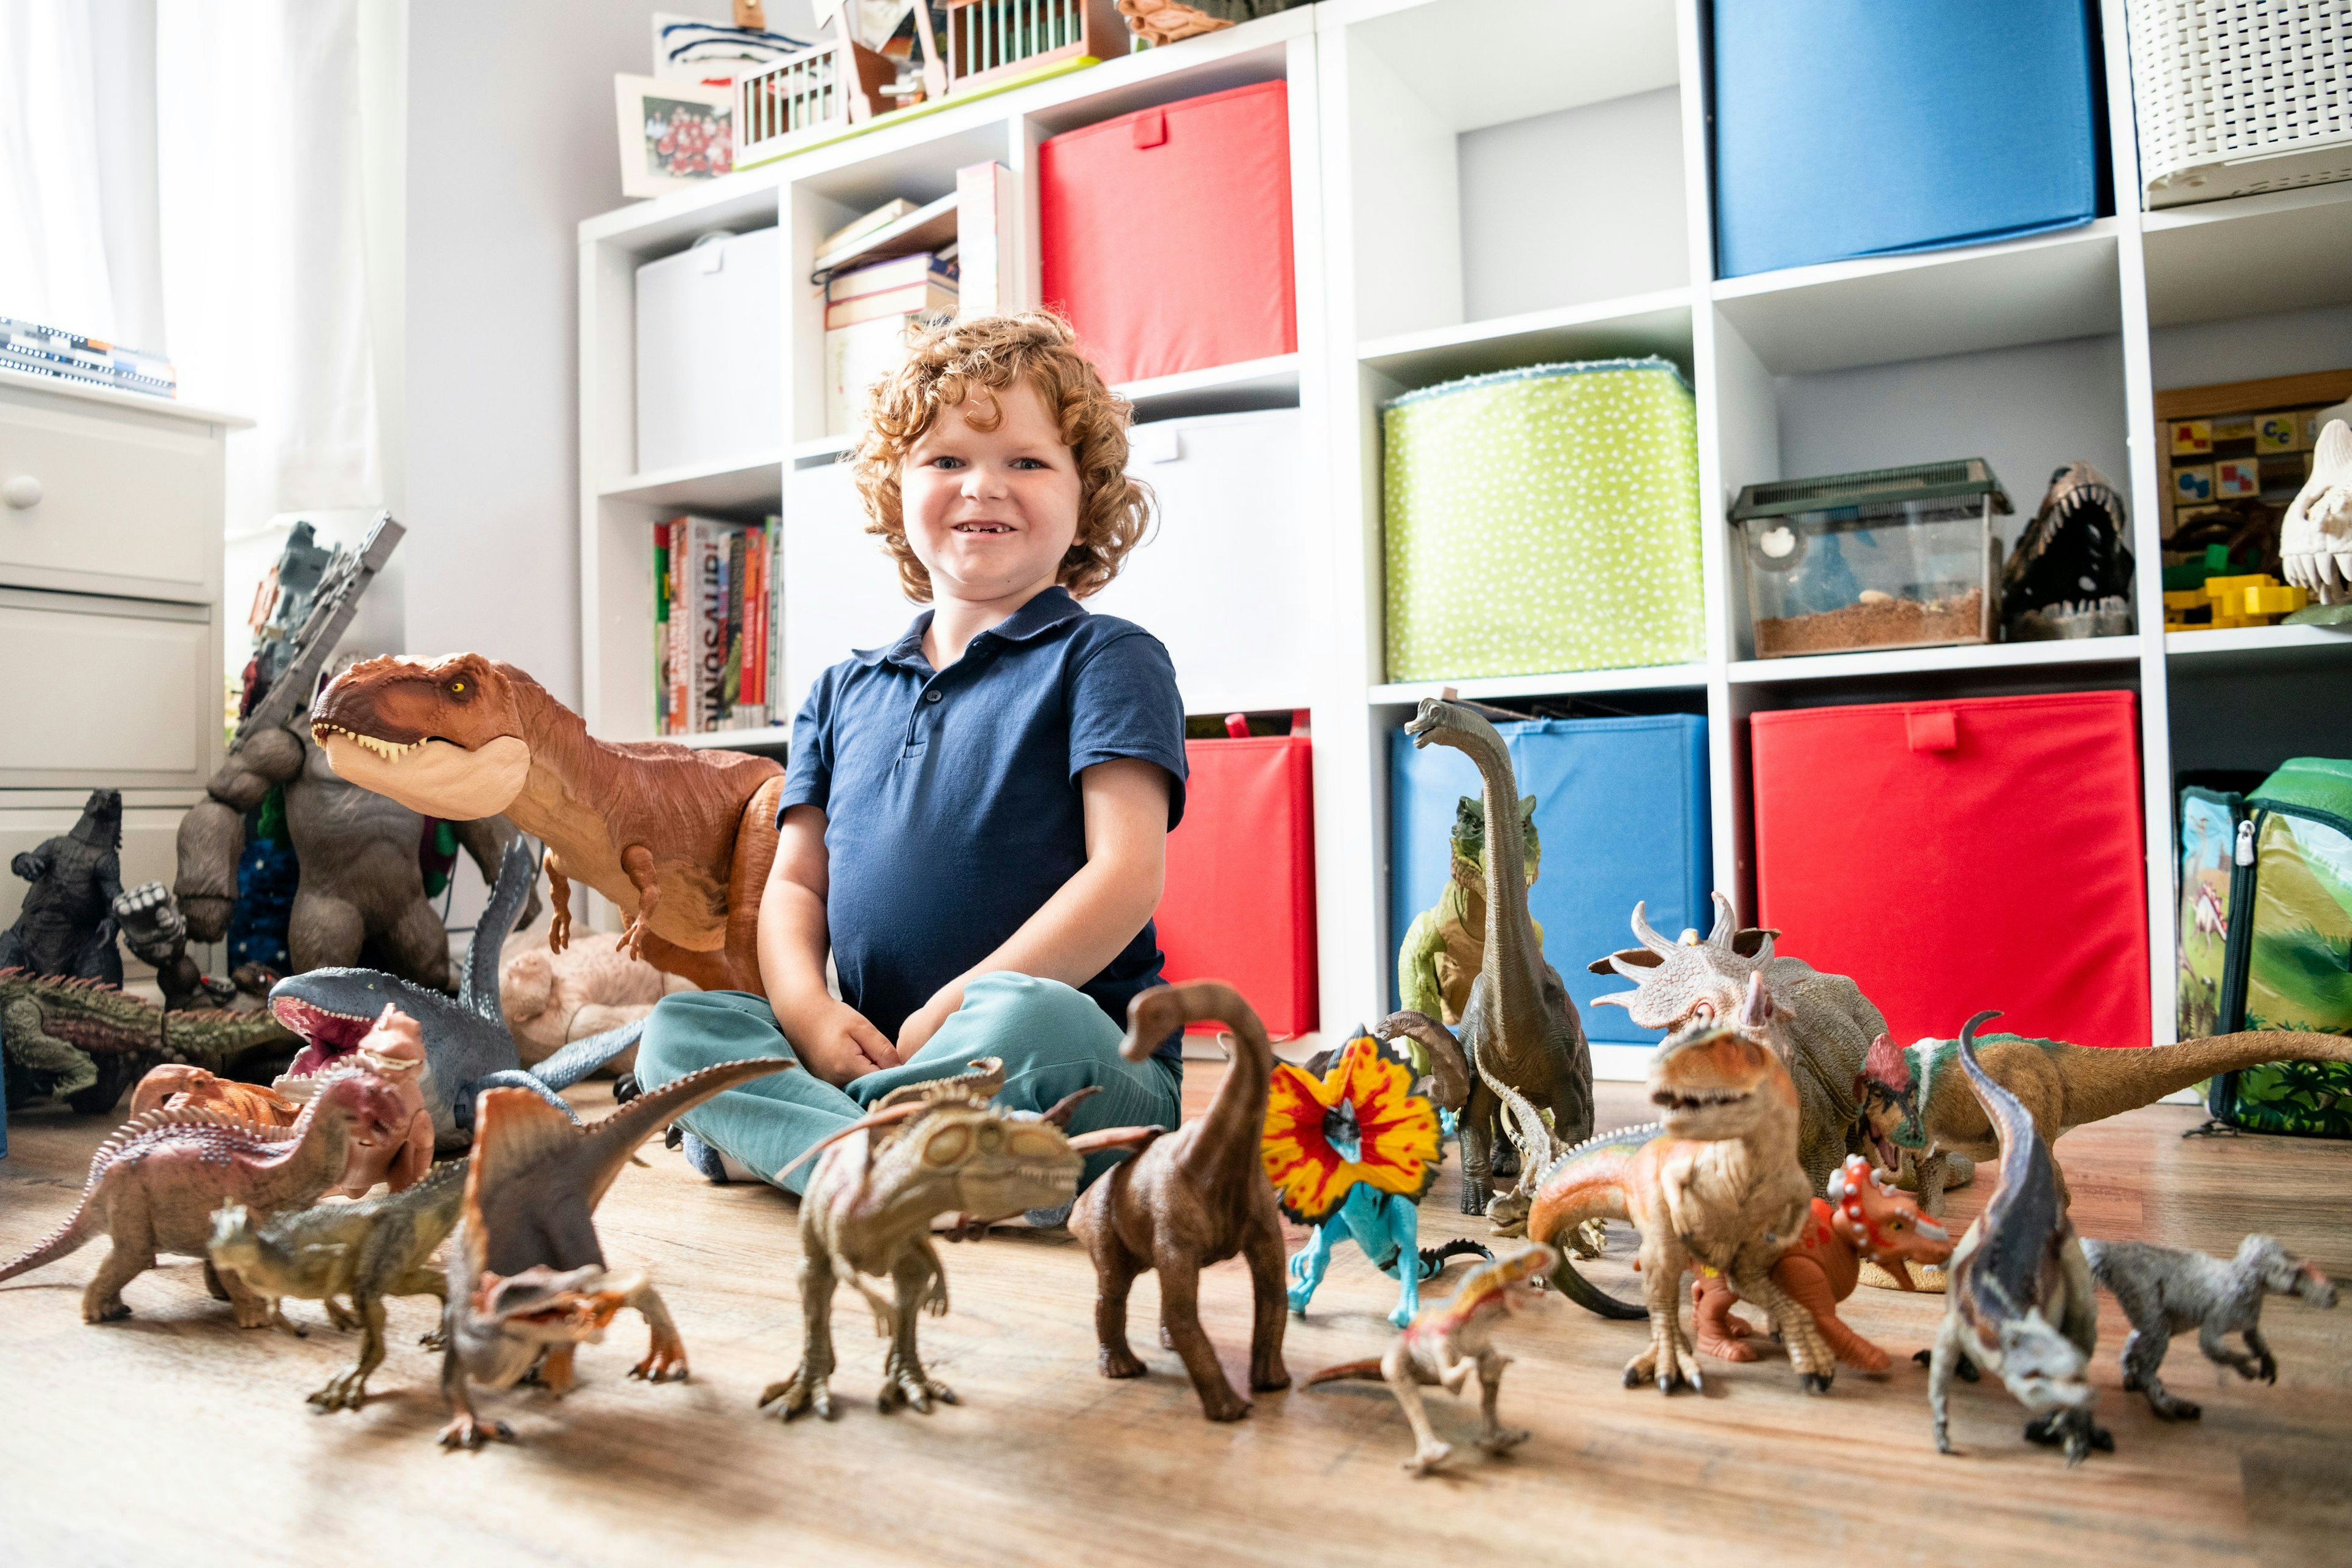 A little boy sits surrounded by toy dinosaurs.